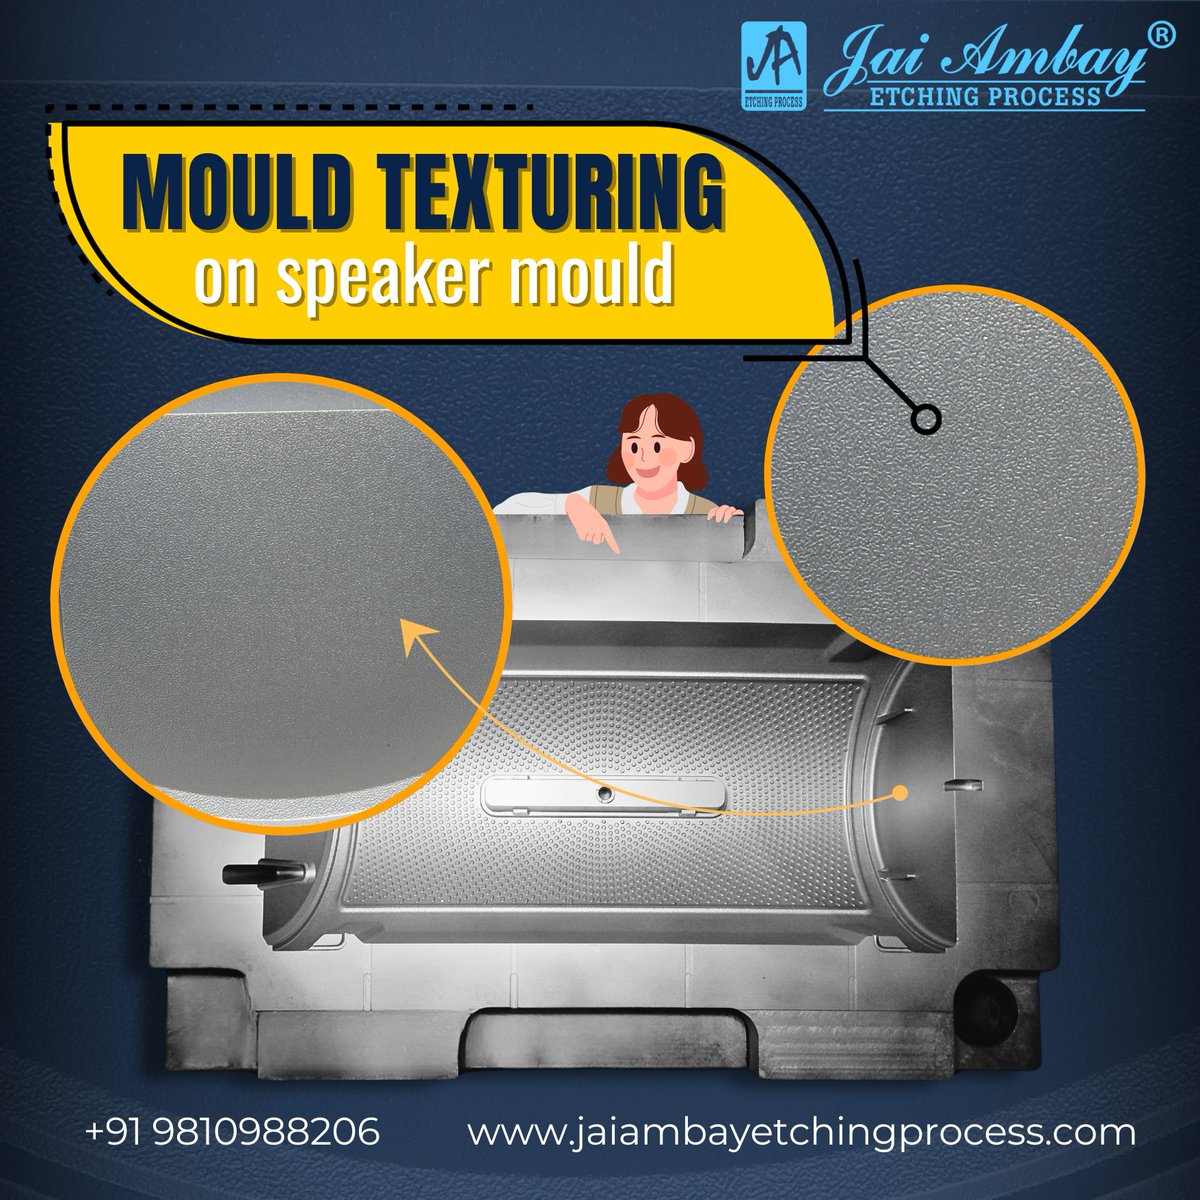 Crafting soundscapes with precision – Moulding textures that bring speakers to life. 🎶🔊 
#trending #laser #service #laserengraving #lasercutting #AtalBihariVajpayeeJi  #chemicaletching #GoodGovernanceDay